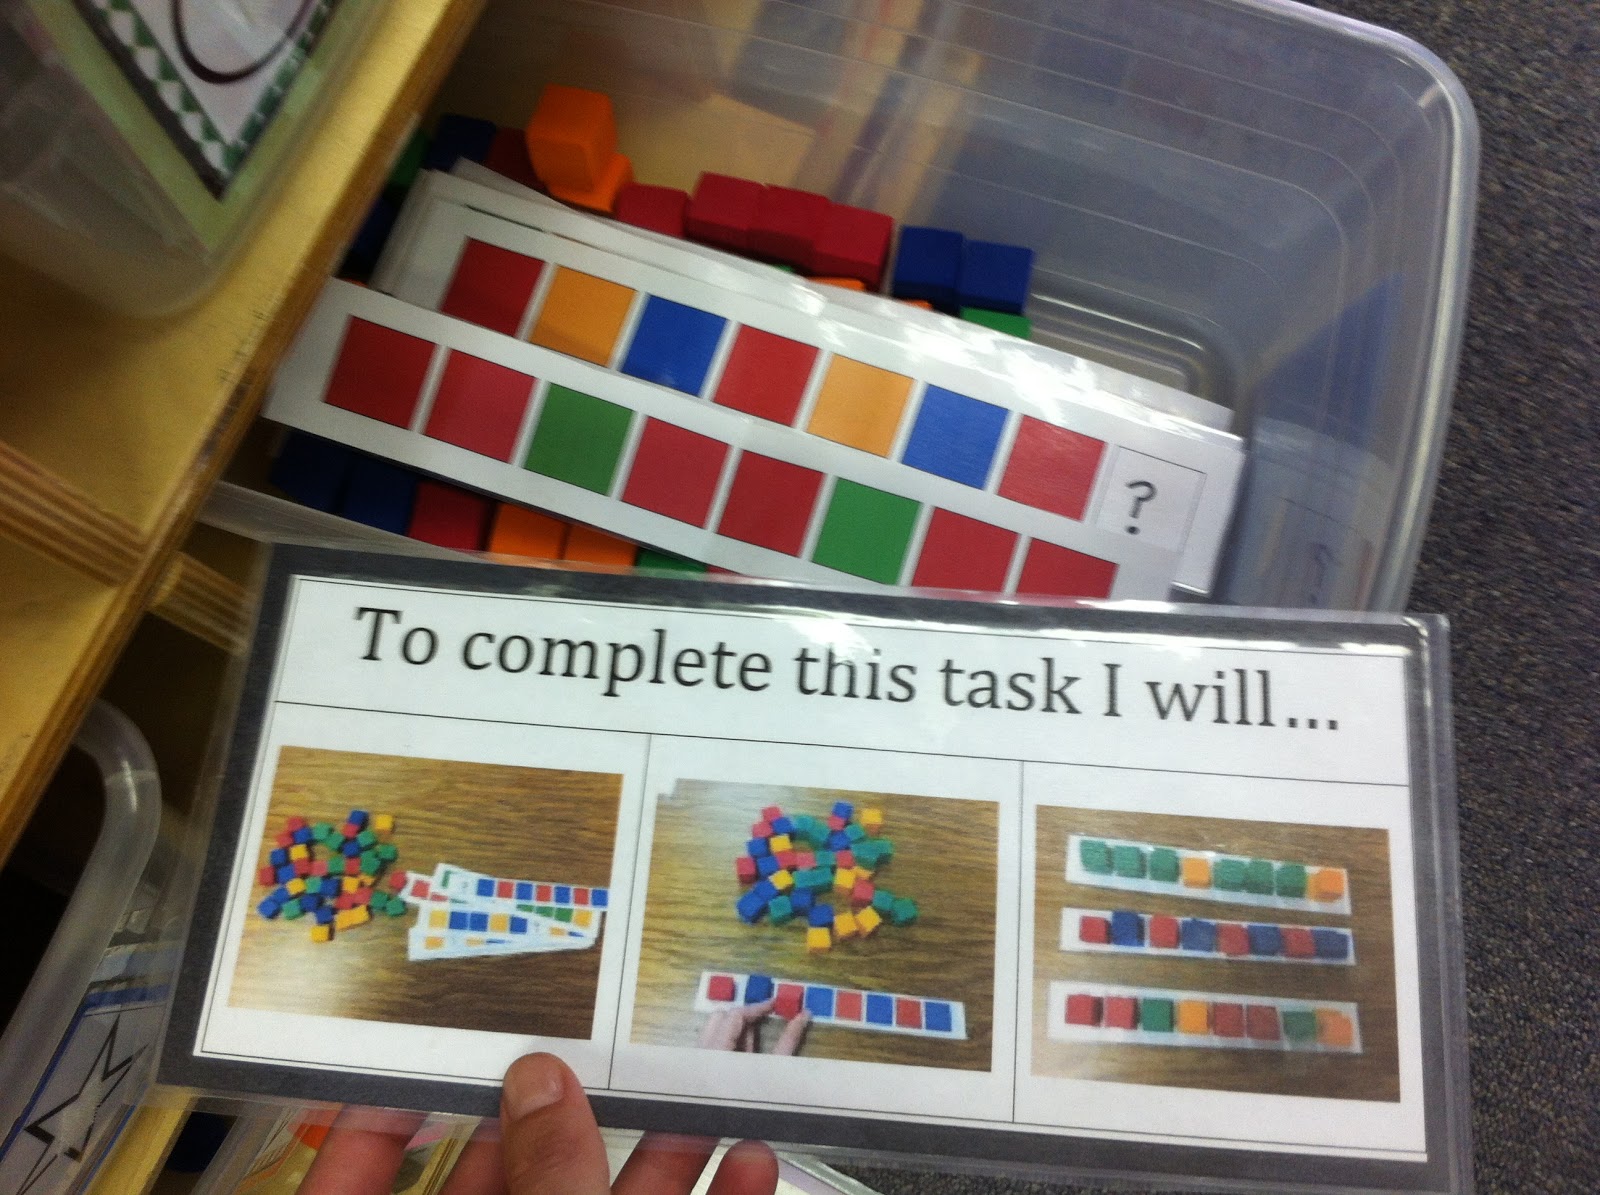 Buy Task Boxes, Autism Curriculum Online, Task Boxes for Sale